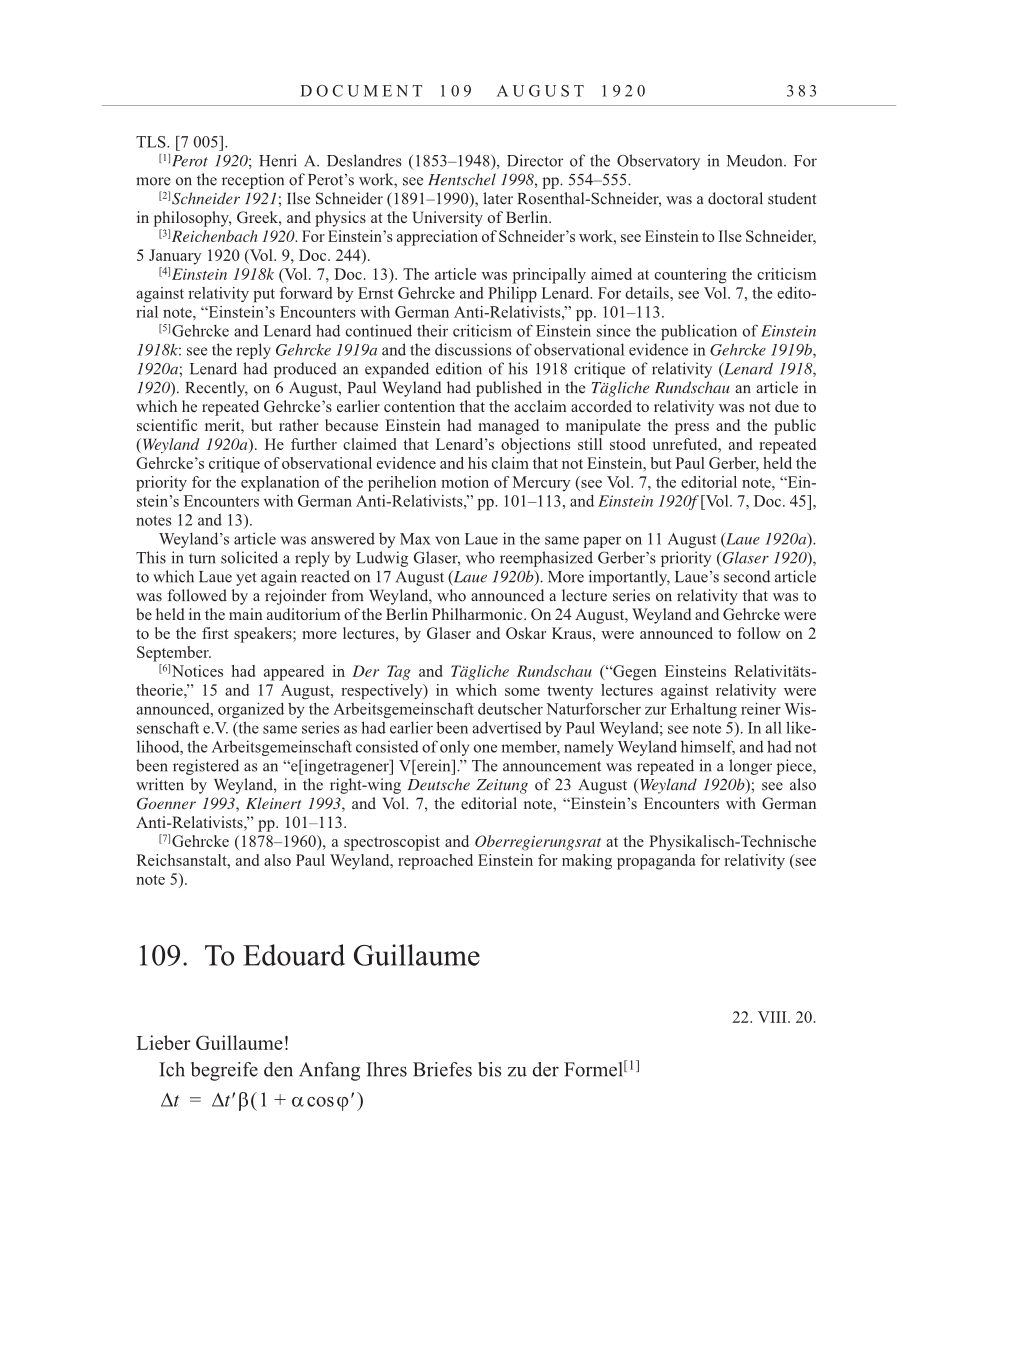 Volume 10: The Berlin Years: Correspondence May-December 1920 / Supplementary Correspondence 1909-1920 page 383